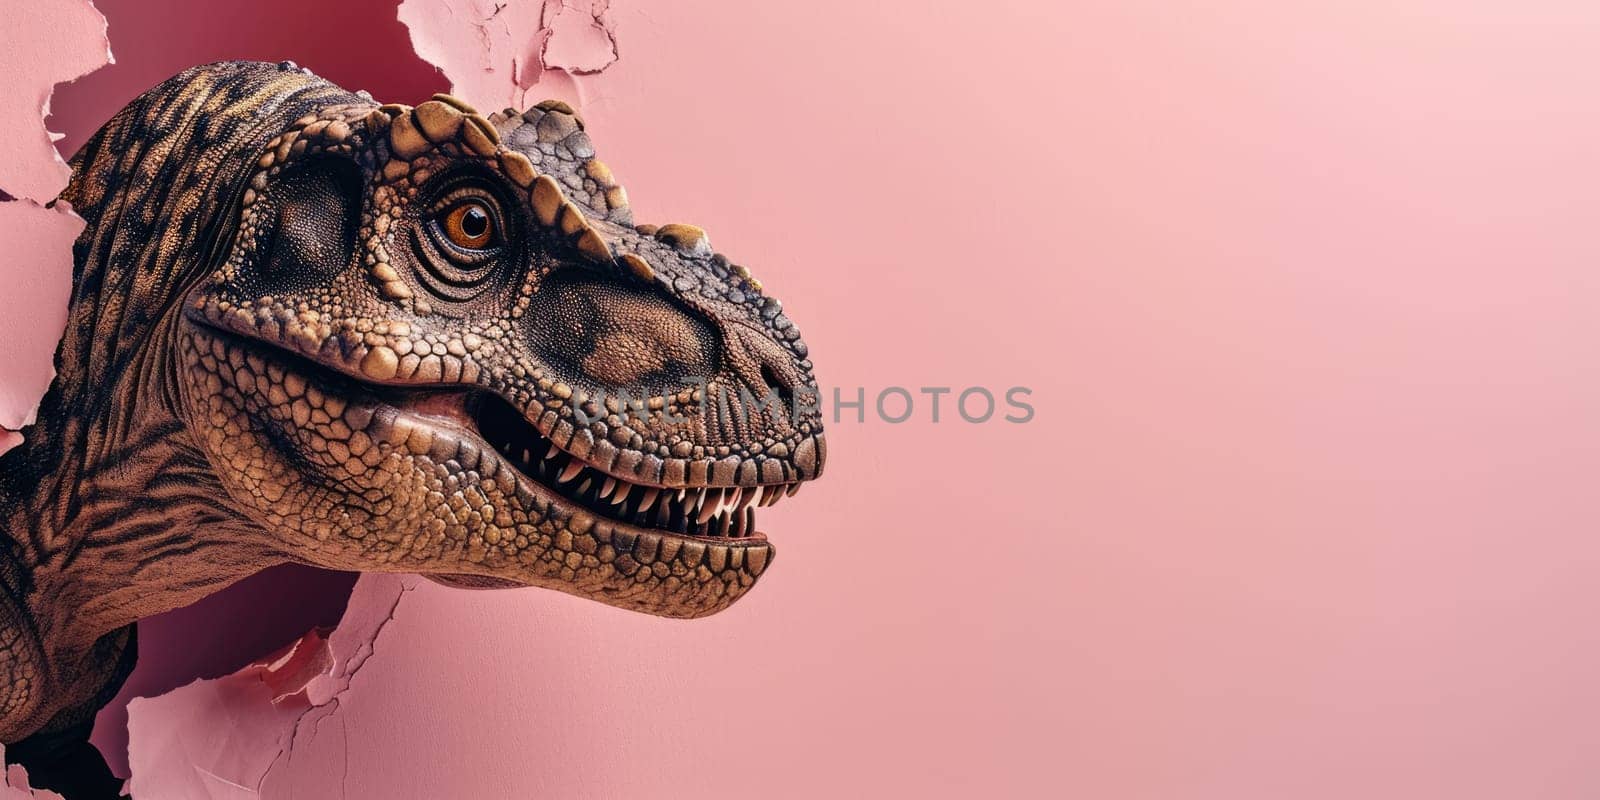 Zoom in picture of breaking pink wall and a t.rex in a hollow pink hole. AIGX03. by biancoblue